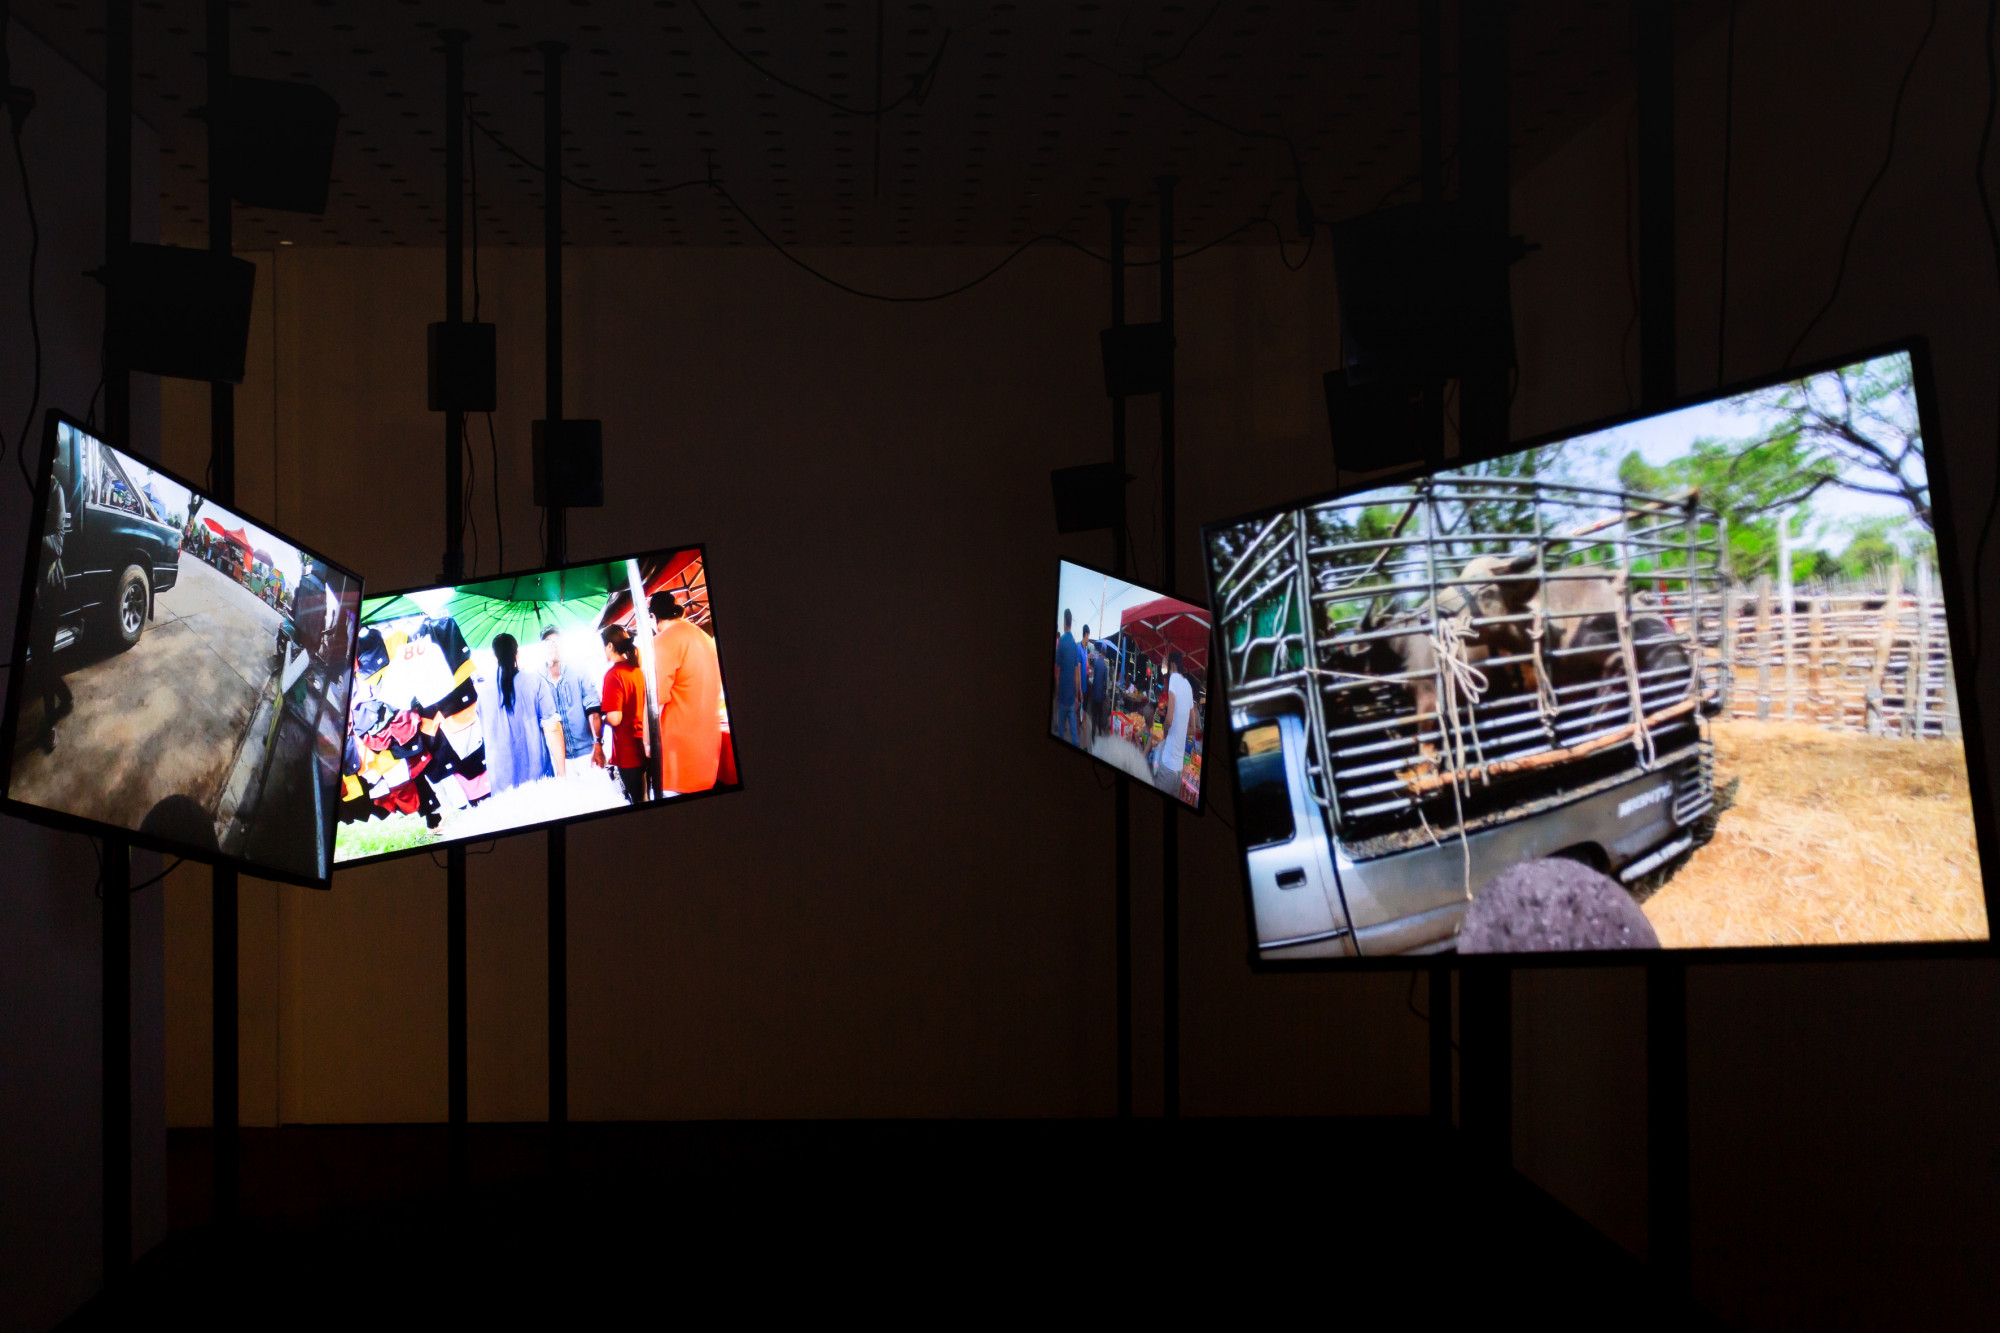 Detail of Arnont Nongyao, <em>Opera of Kard (Market)</em>, 2019, 6-channel video installation, 12-speaker sound installation, dimension variable, Centre for Contemporary Photography. Image courtesy of CCP. Photo: J Forsyth.